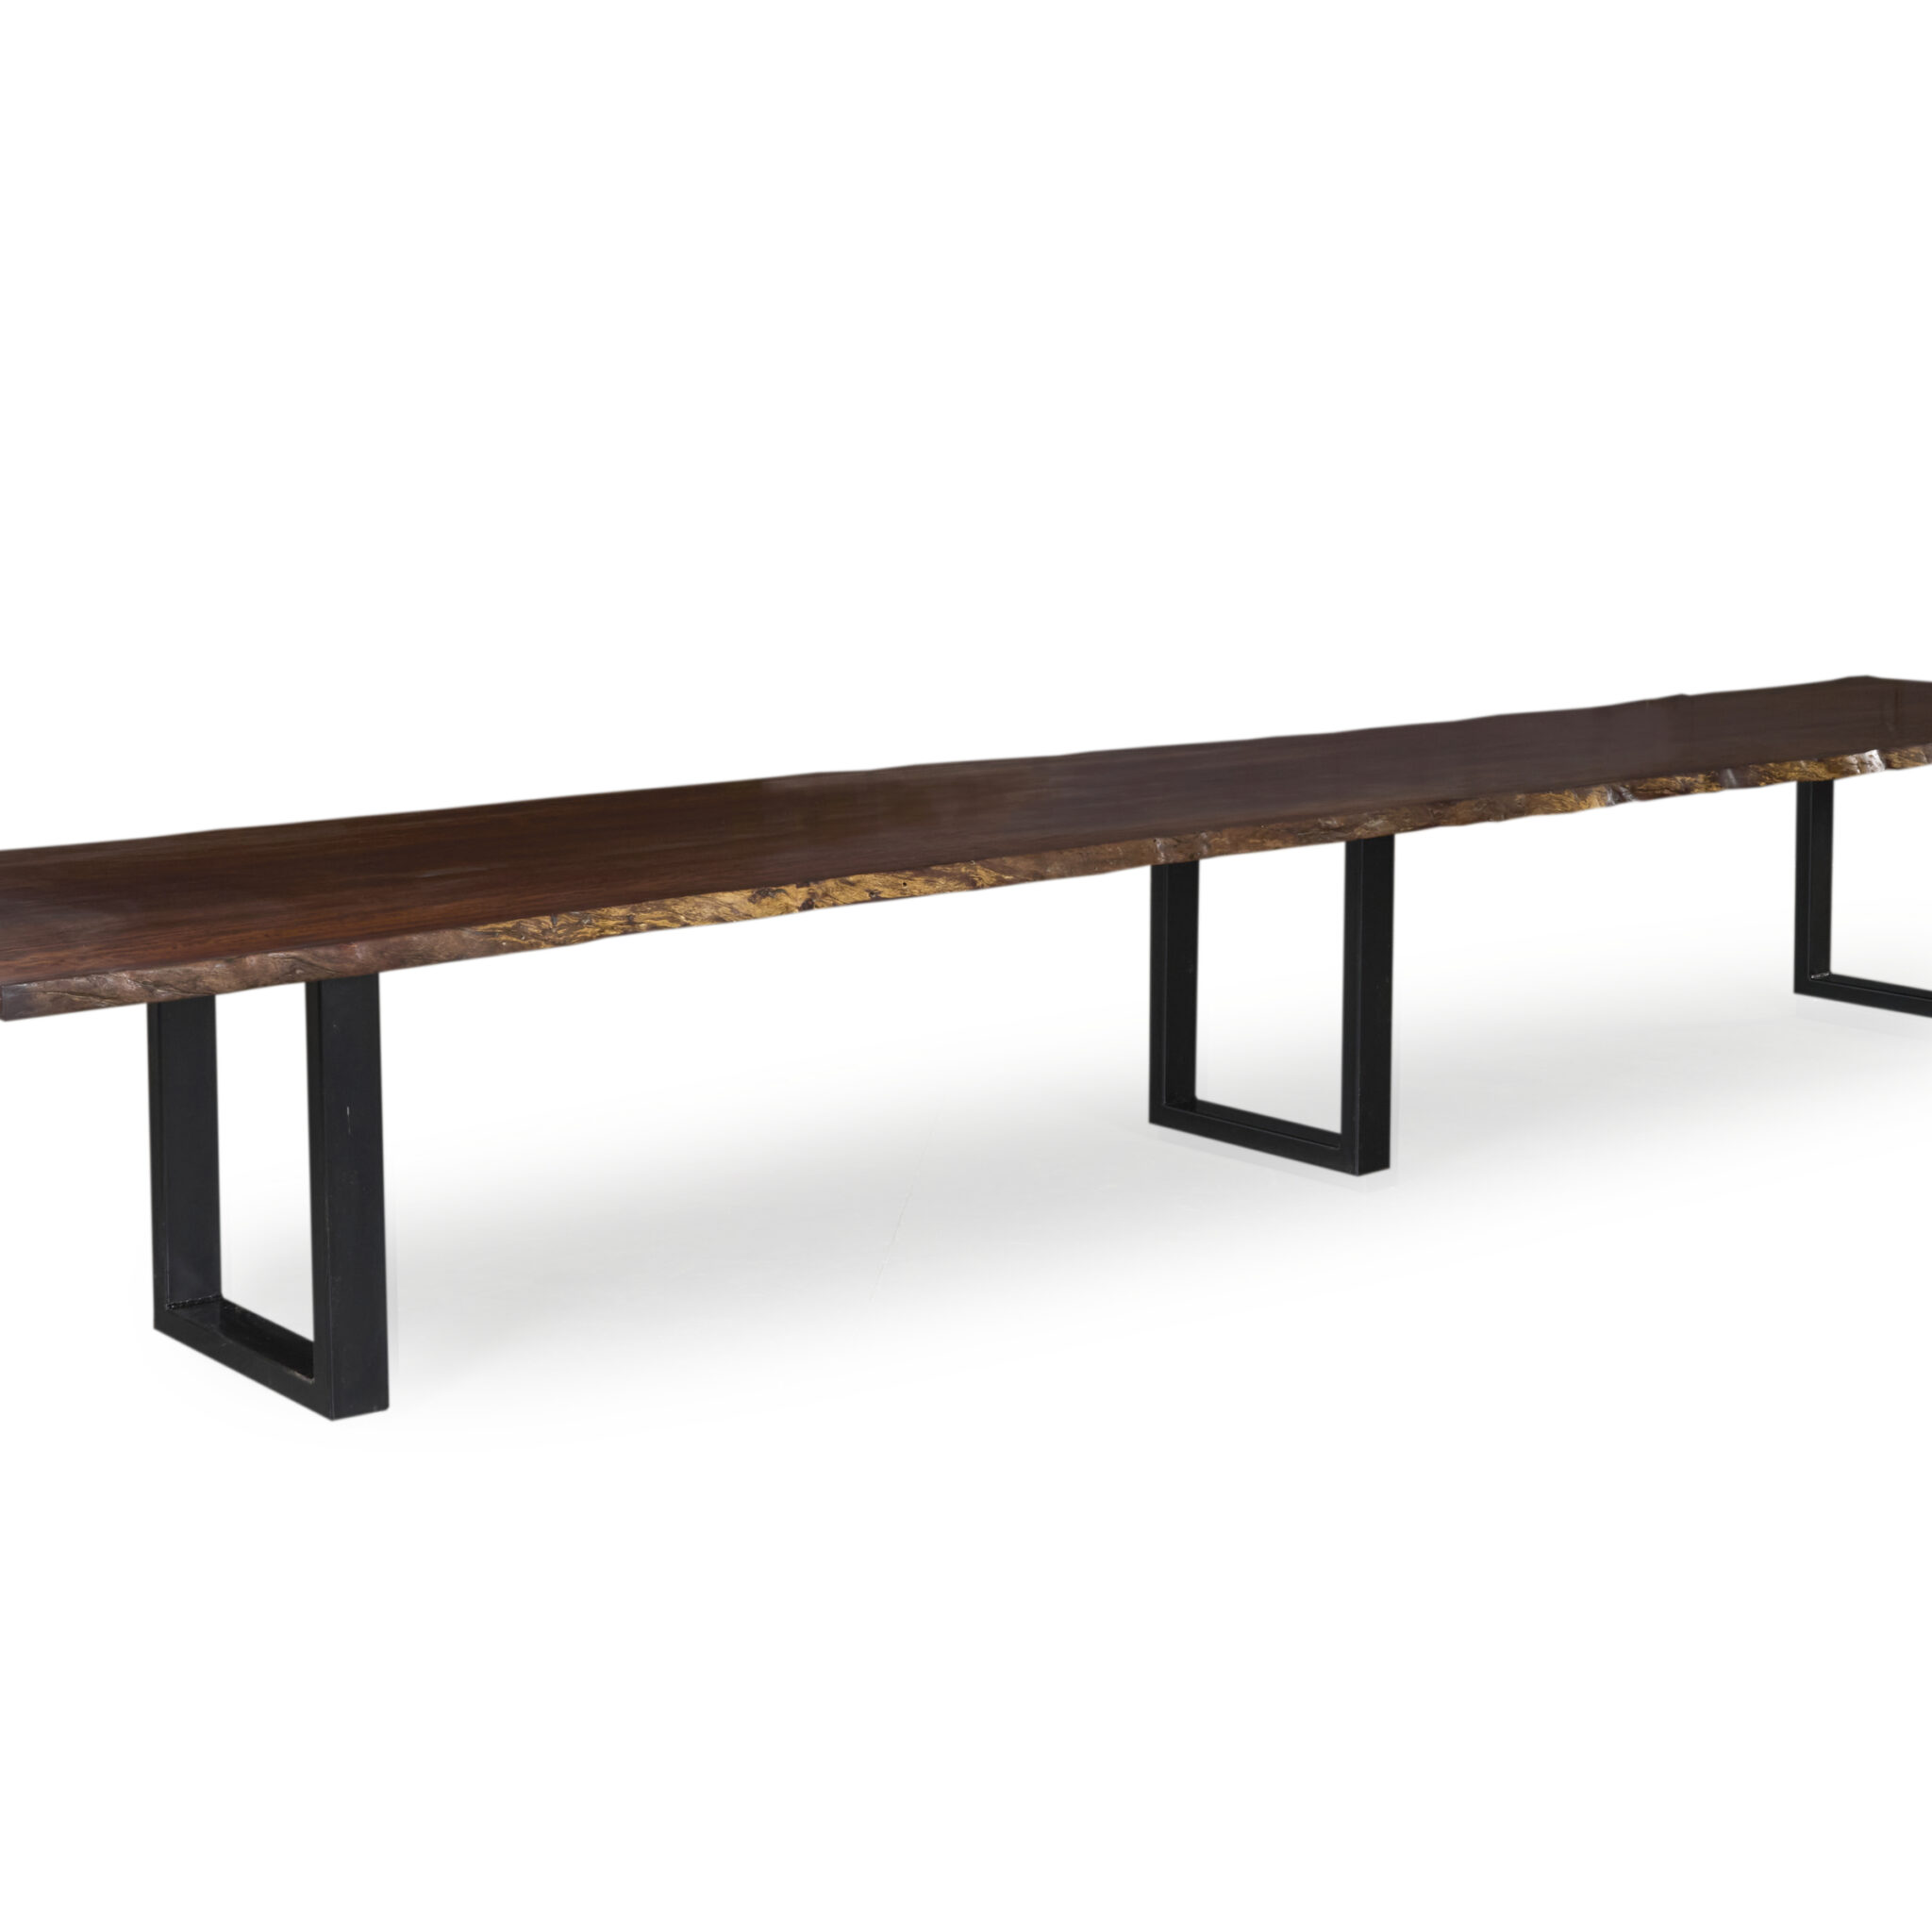 Versatile Brighton Table Perfect for Dining or Boardroom Meetings